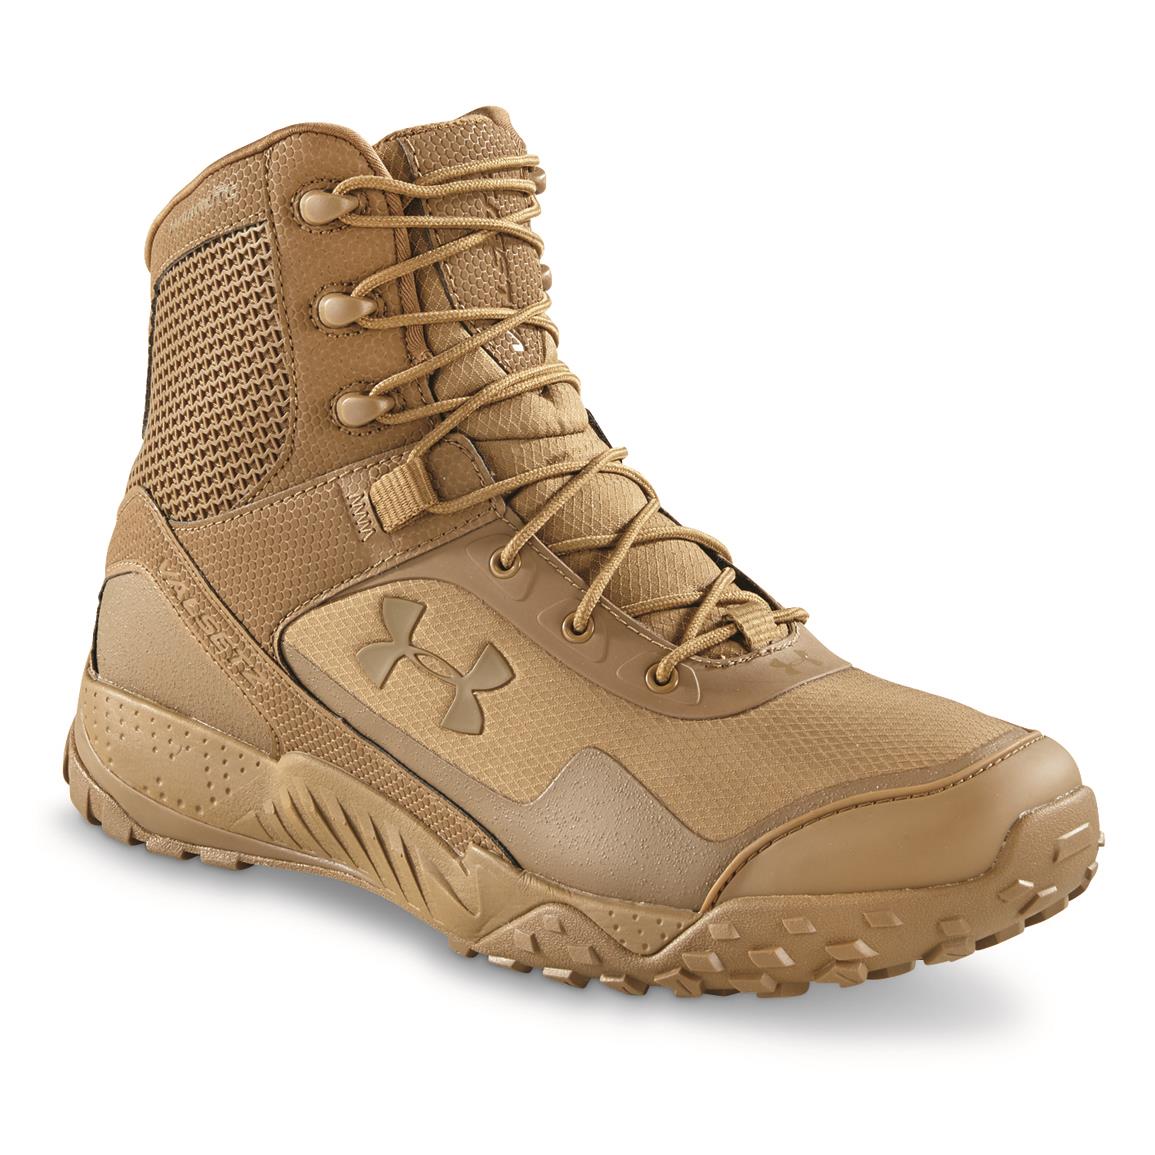 Under Armor Army Boots - Army Military